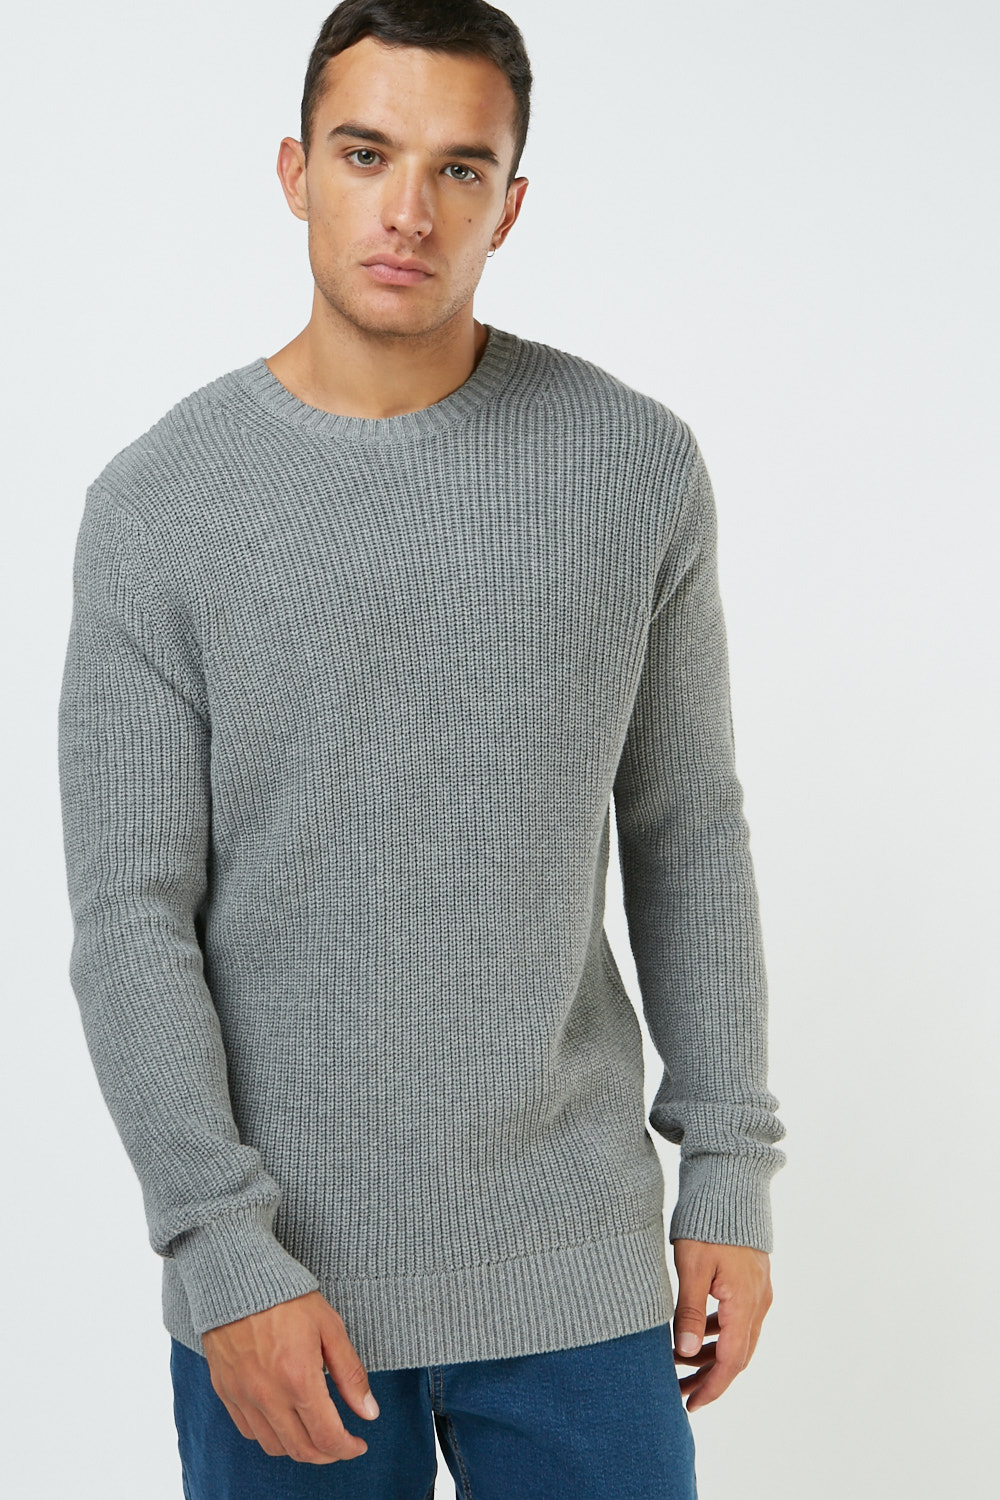 Plain Knitted Jumper - Just $7